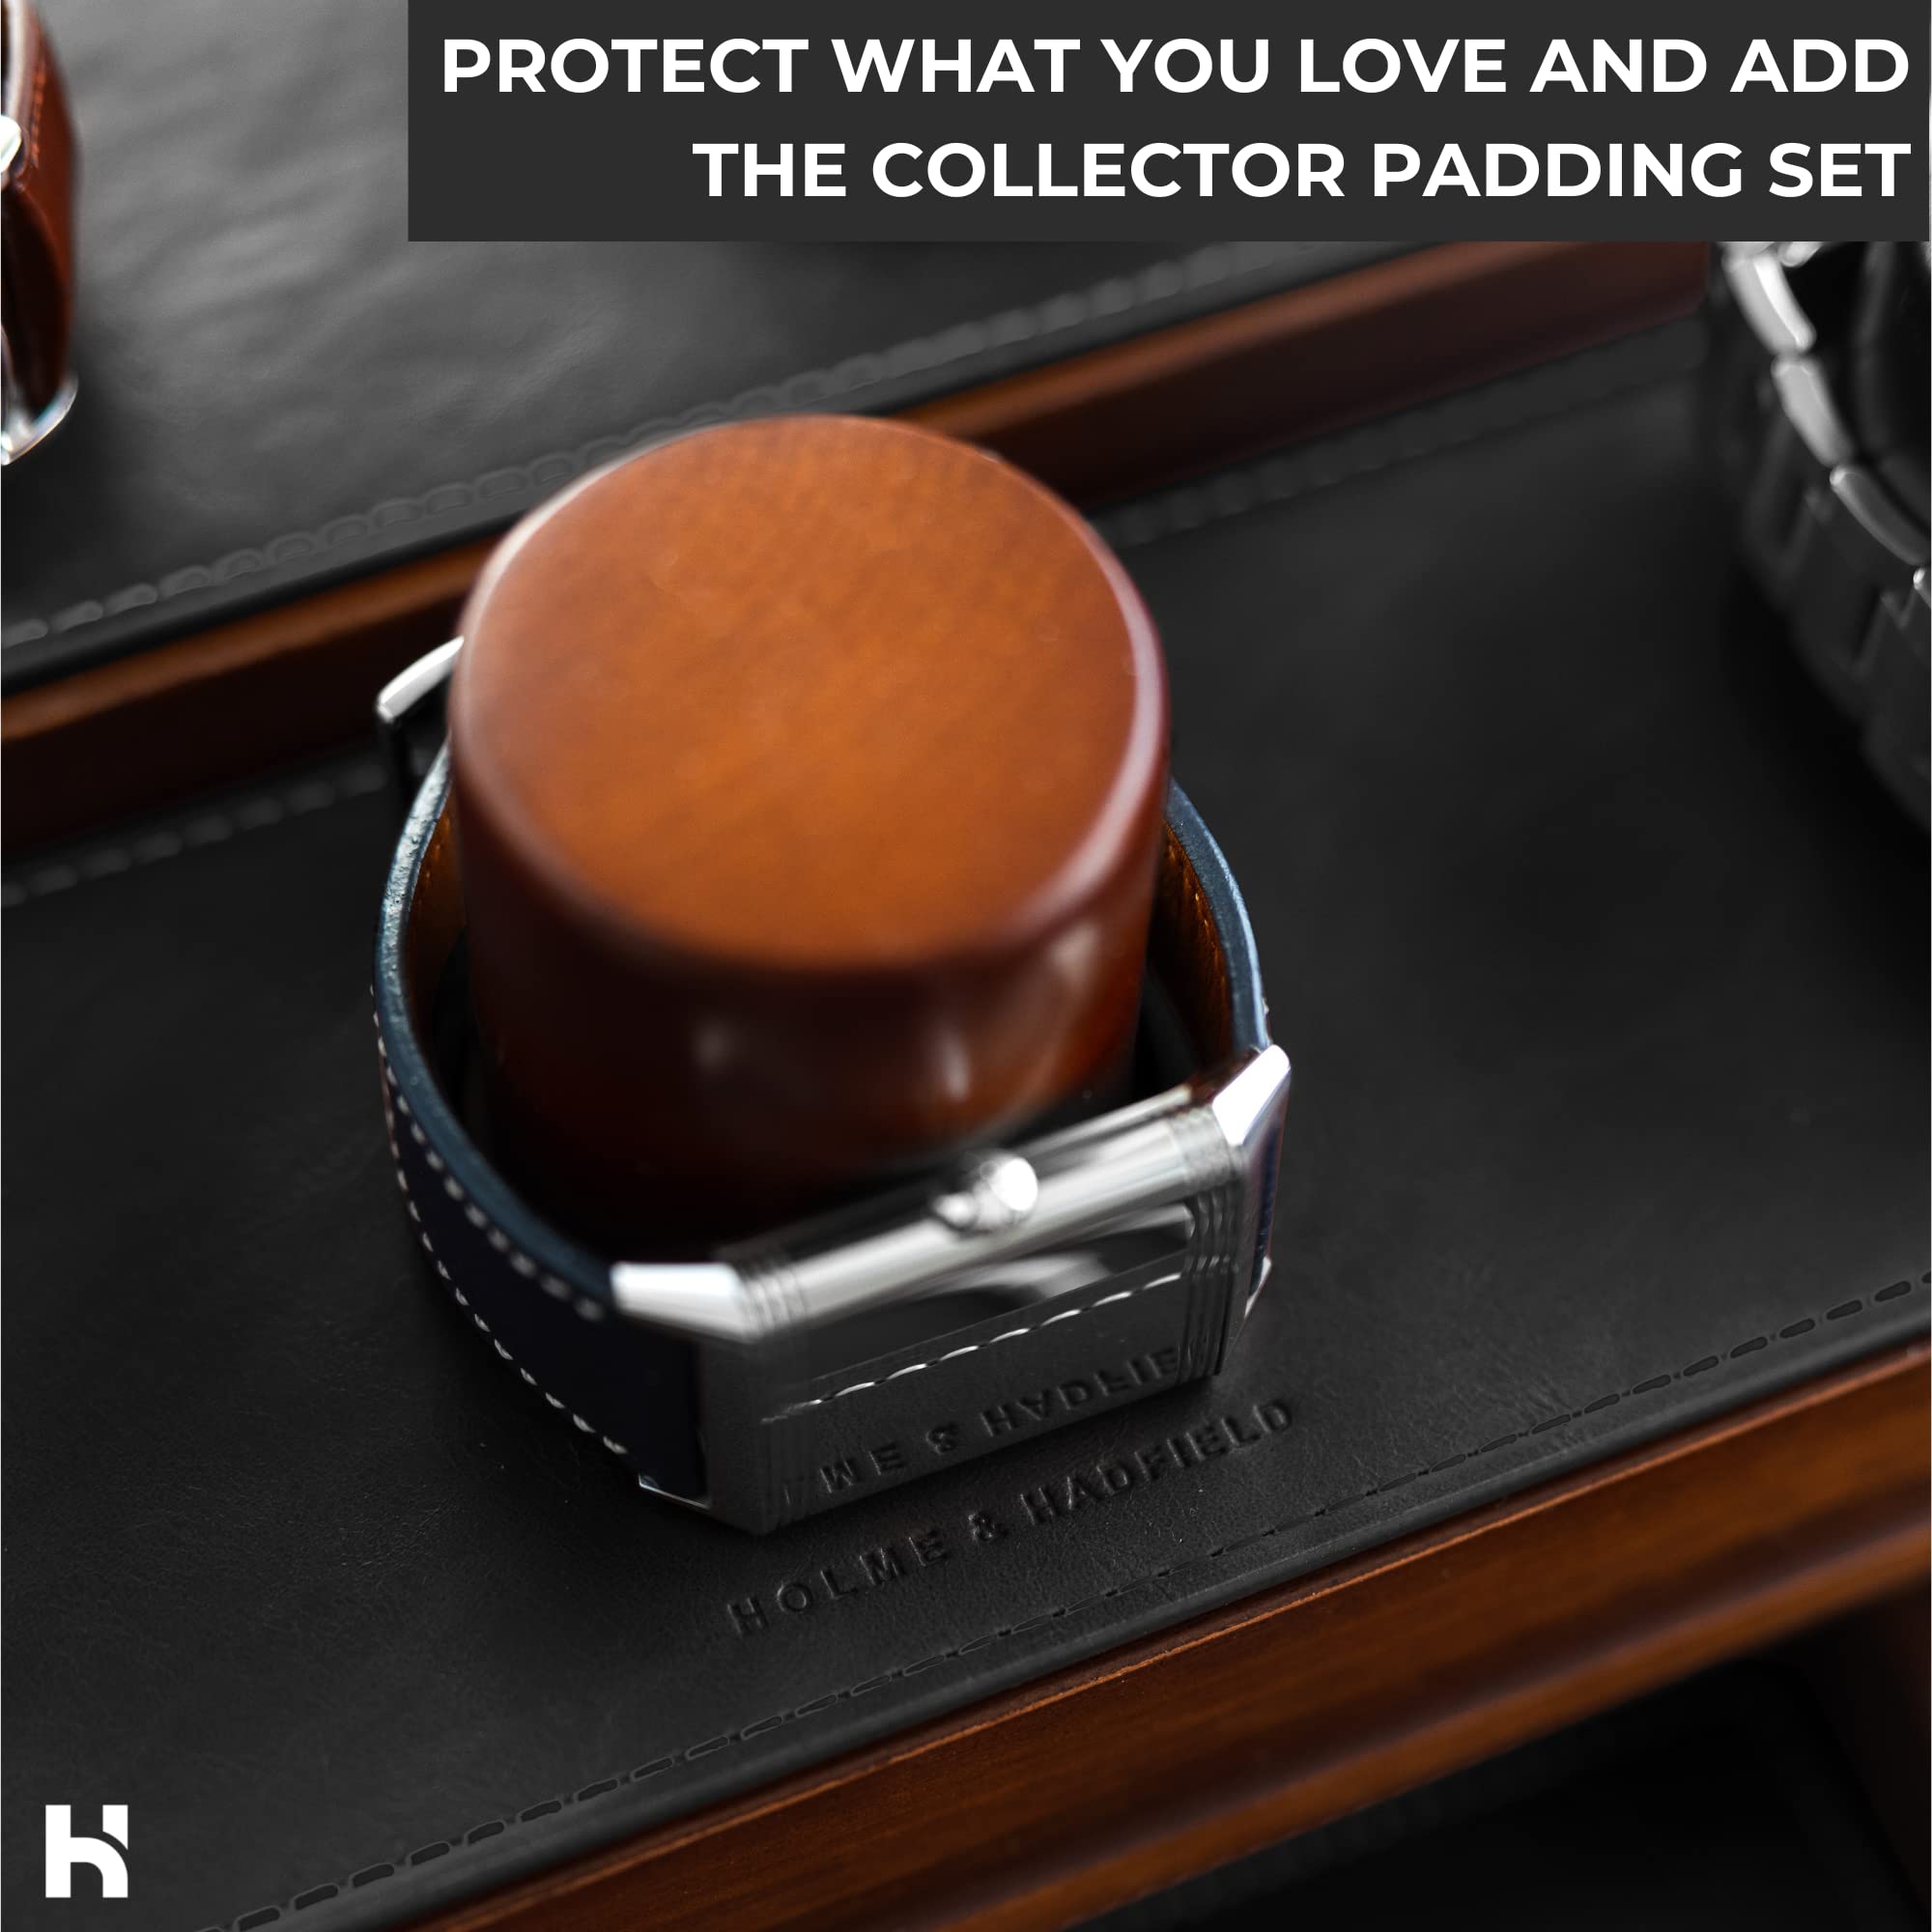 Holme & Hadfield The Collector with Vegan Leather Padding for Extra Protection and Luxurious Finish – Lifetime Assurance Included